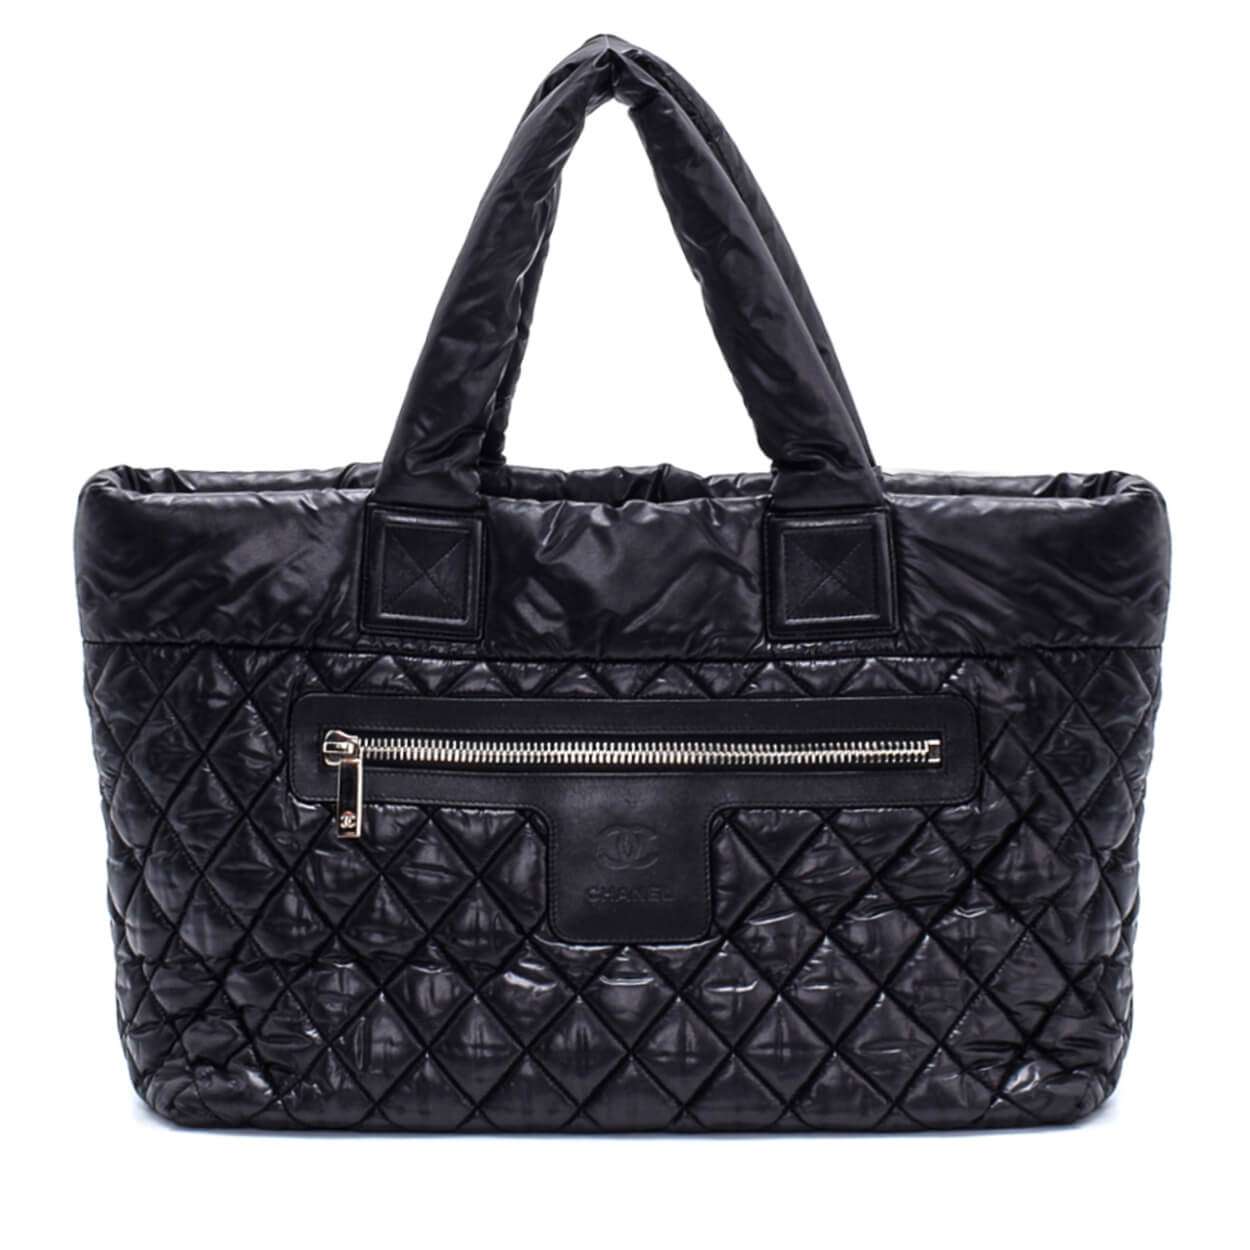 Chanel - Black Nylon Quilted Cocoon Shopping Bag